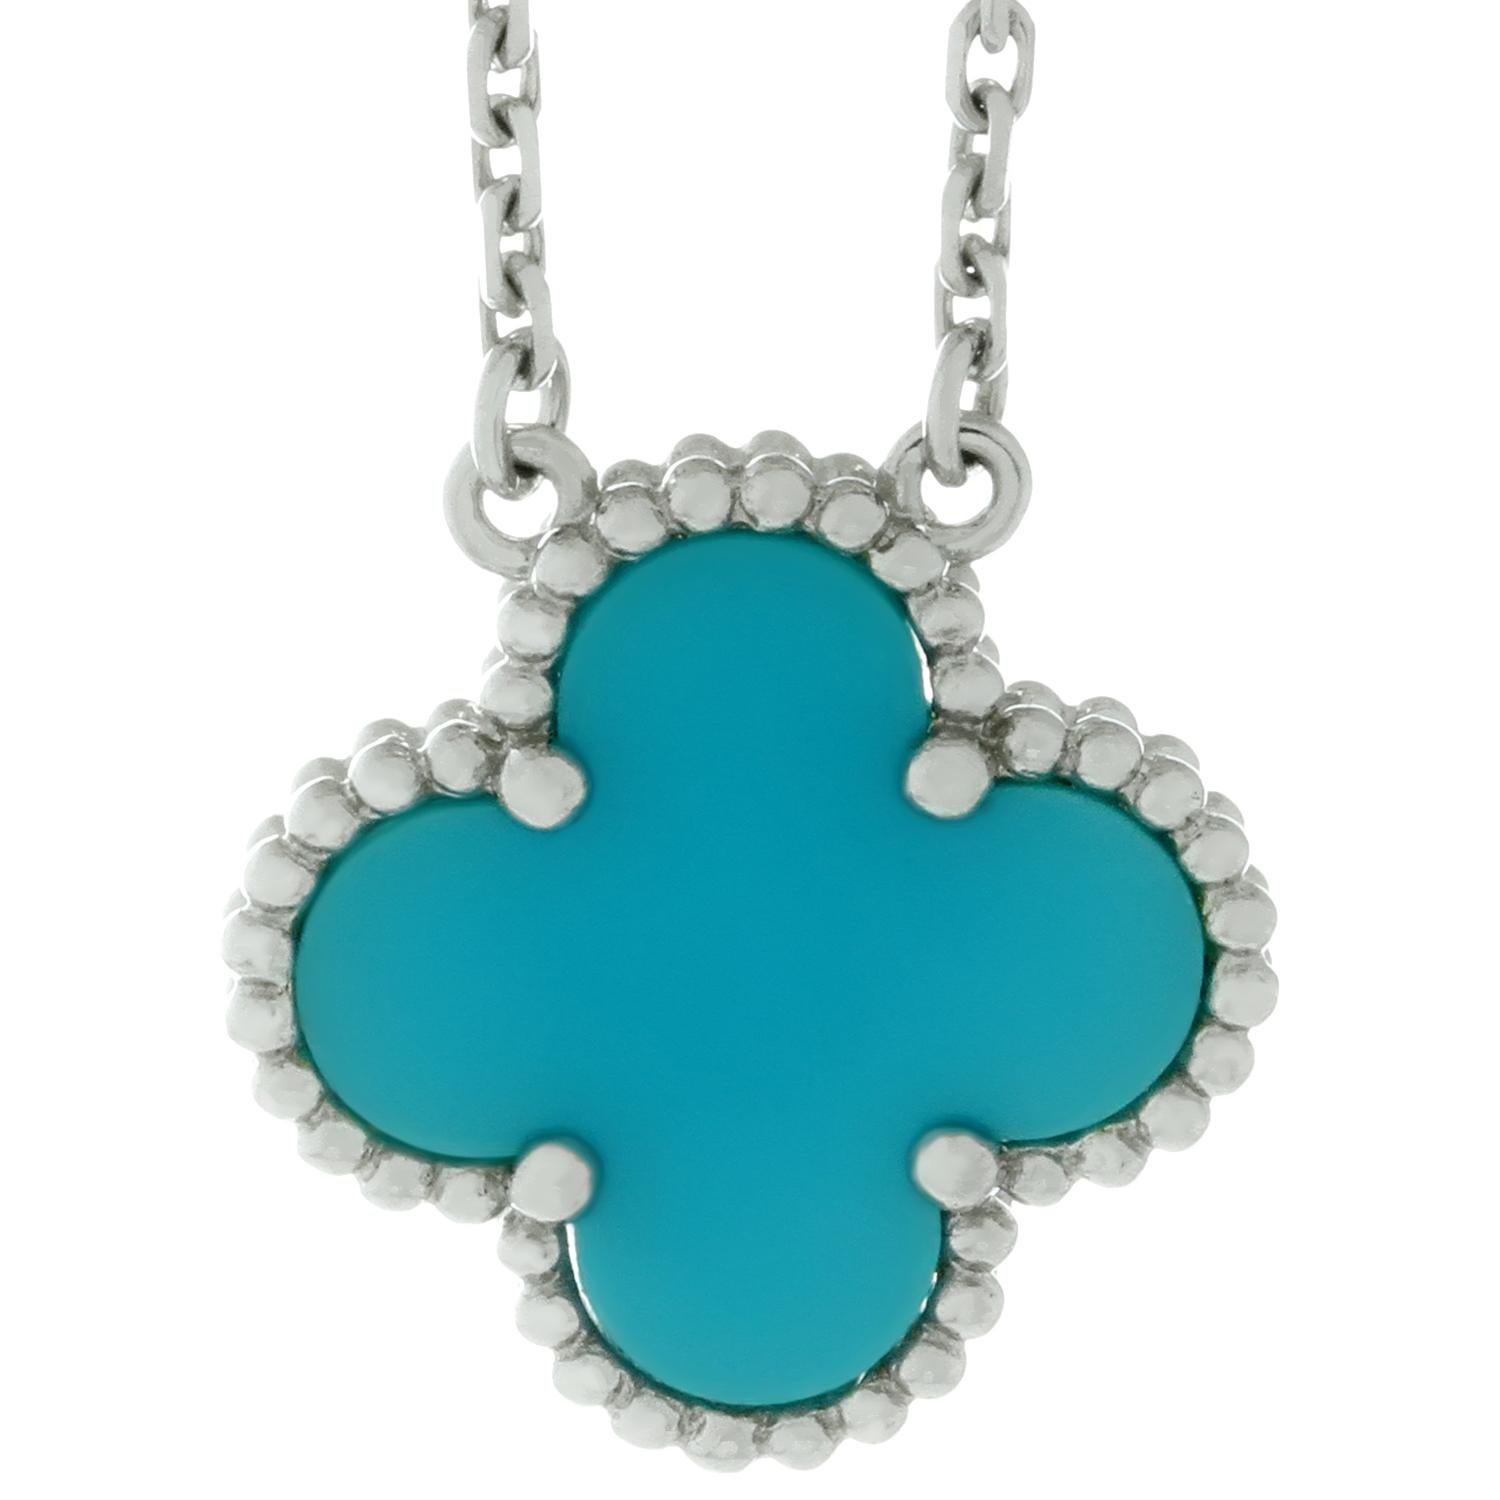 Van Cleef & Arpels Alhambra Turquoise White Gold Pendant Necklace